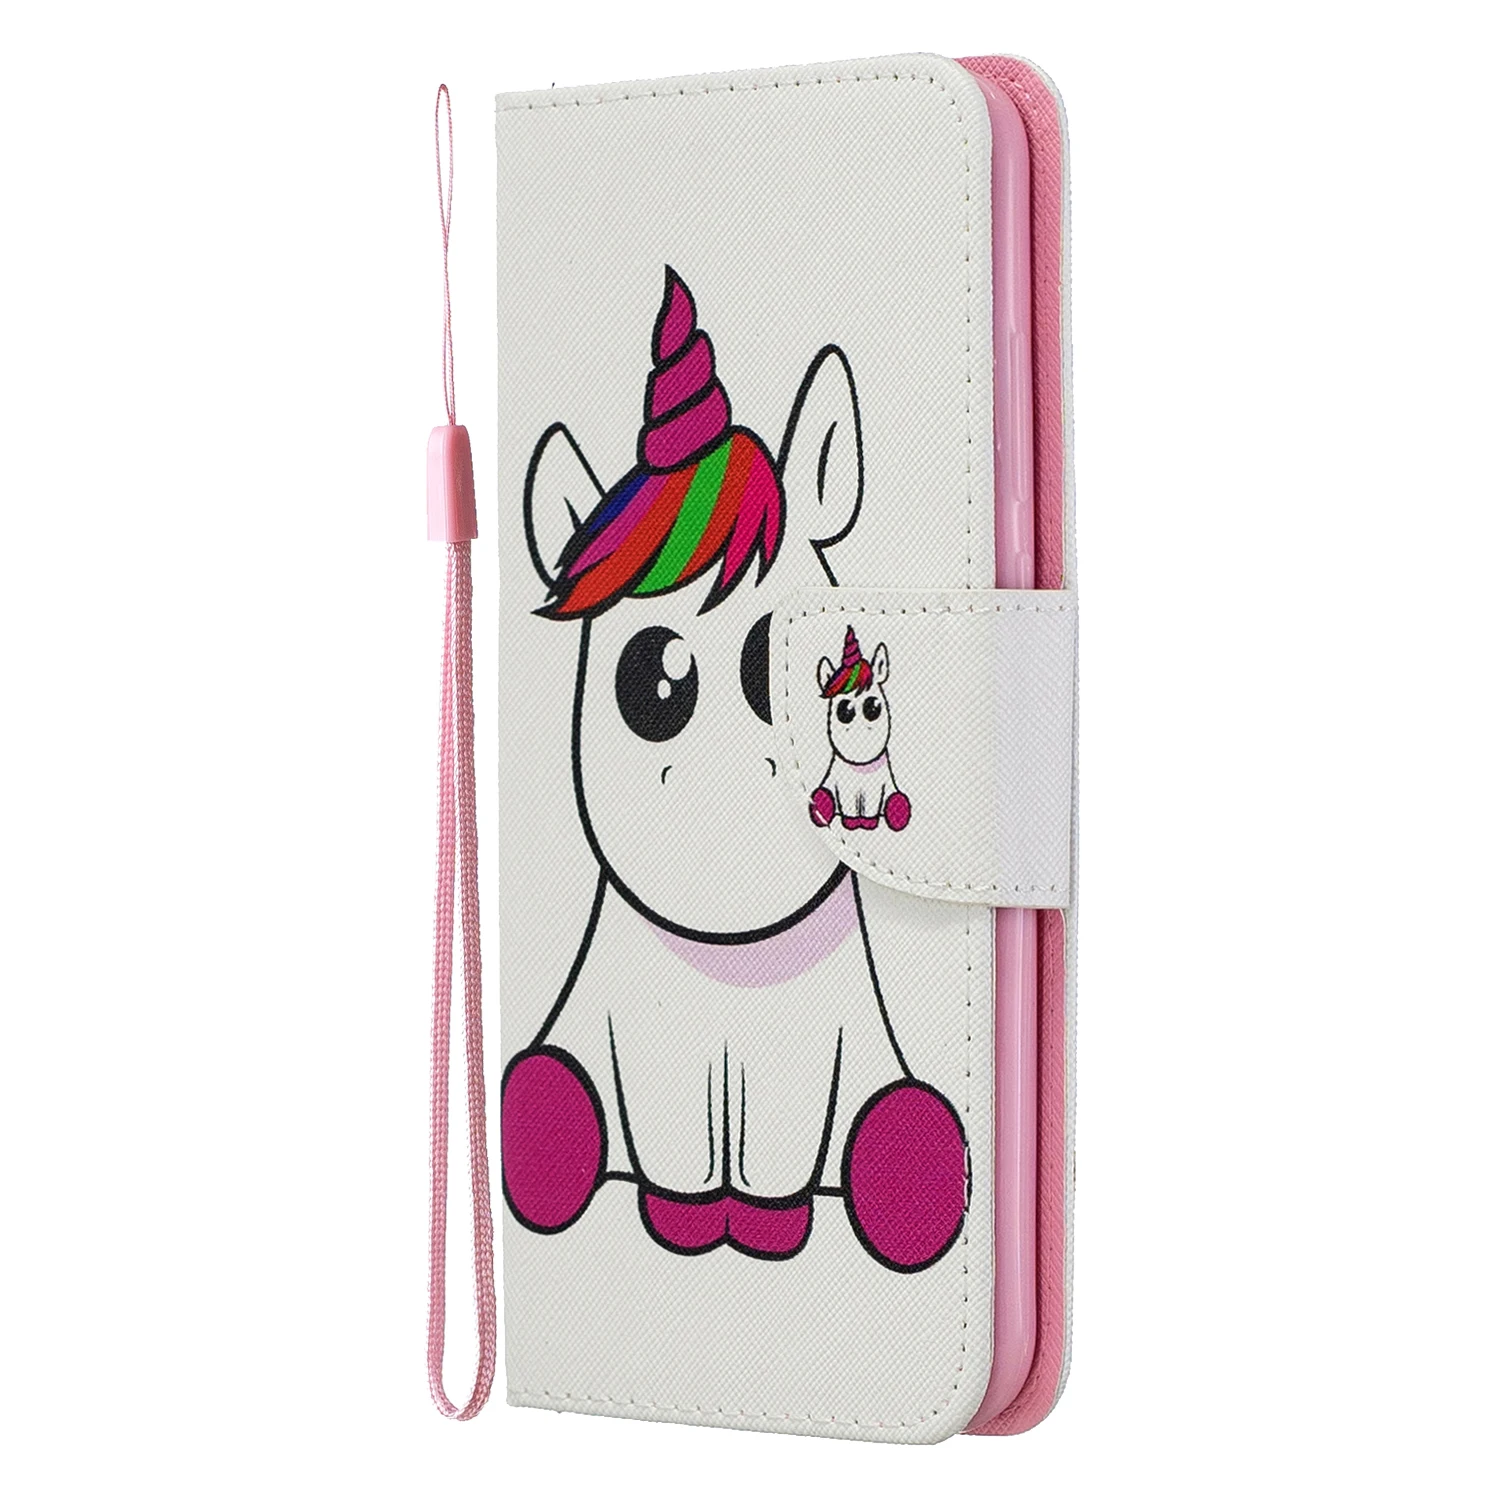 y6 Leather Case on sFor Huawei Y6 Cover for Huawei Y 6 Y6 Prime MRD-LX1 Case Unicorn Flip Wallet Phone Cases Capa